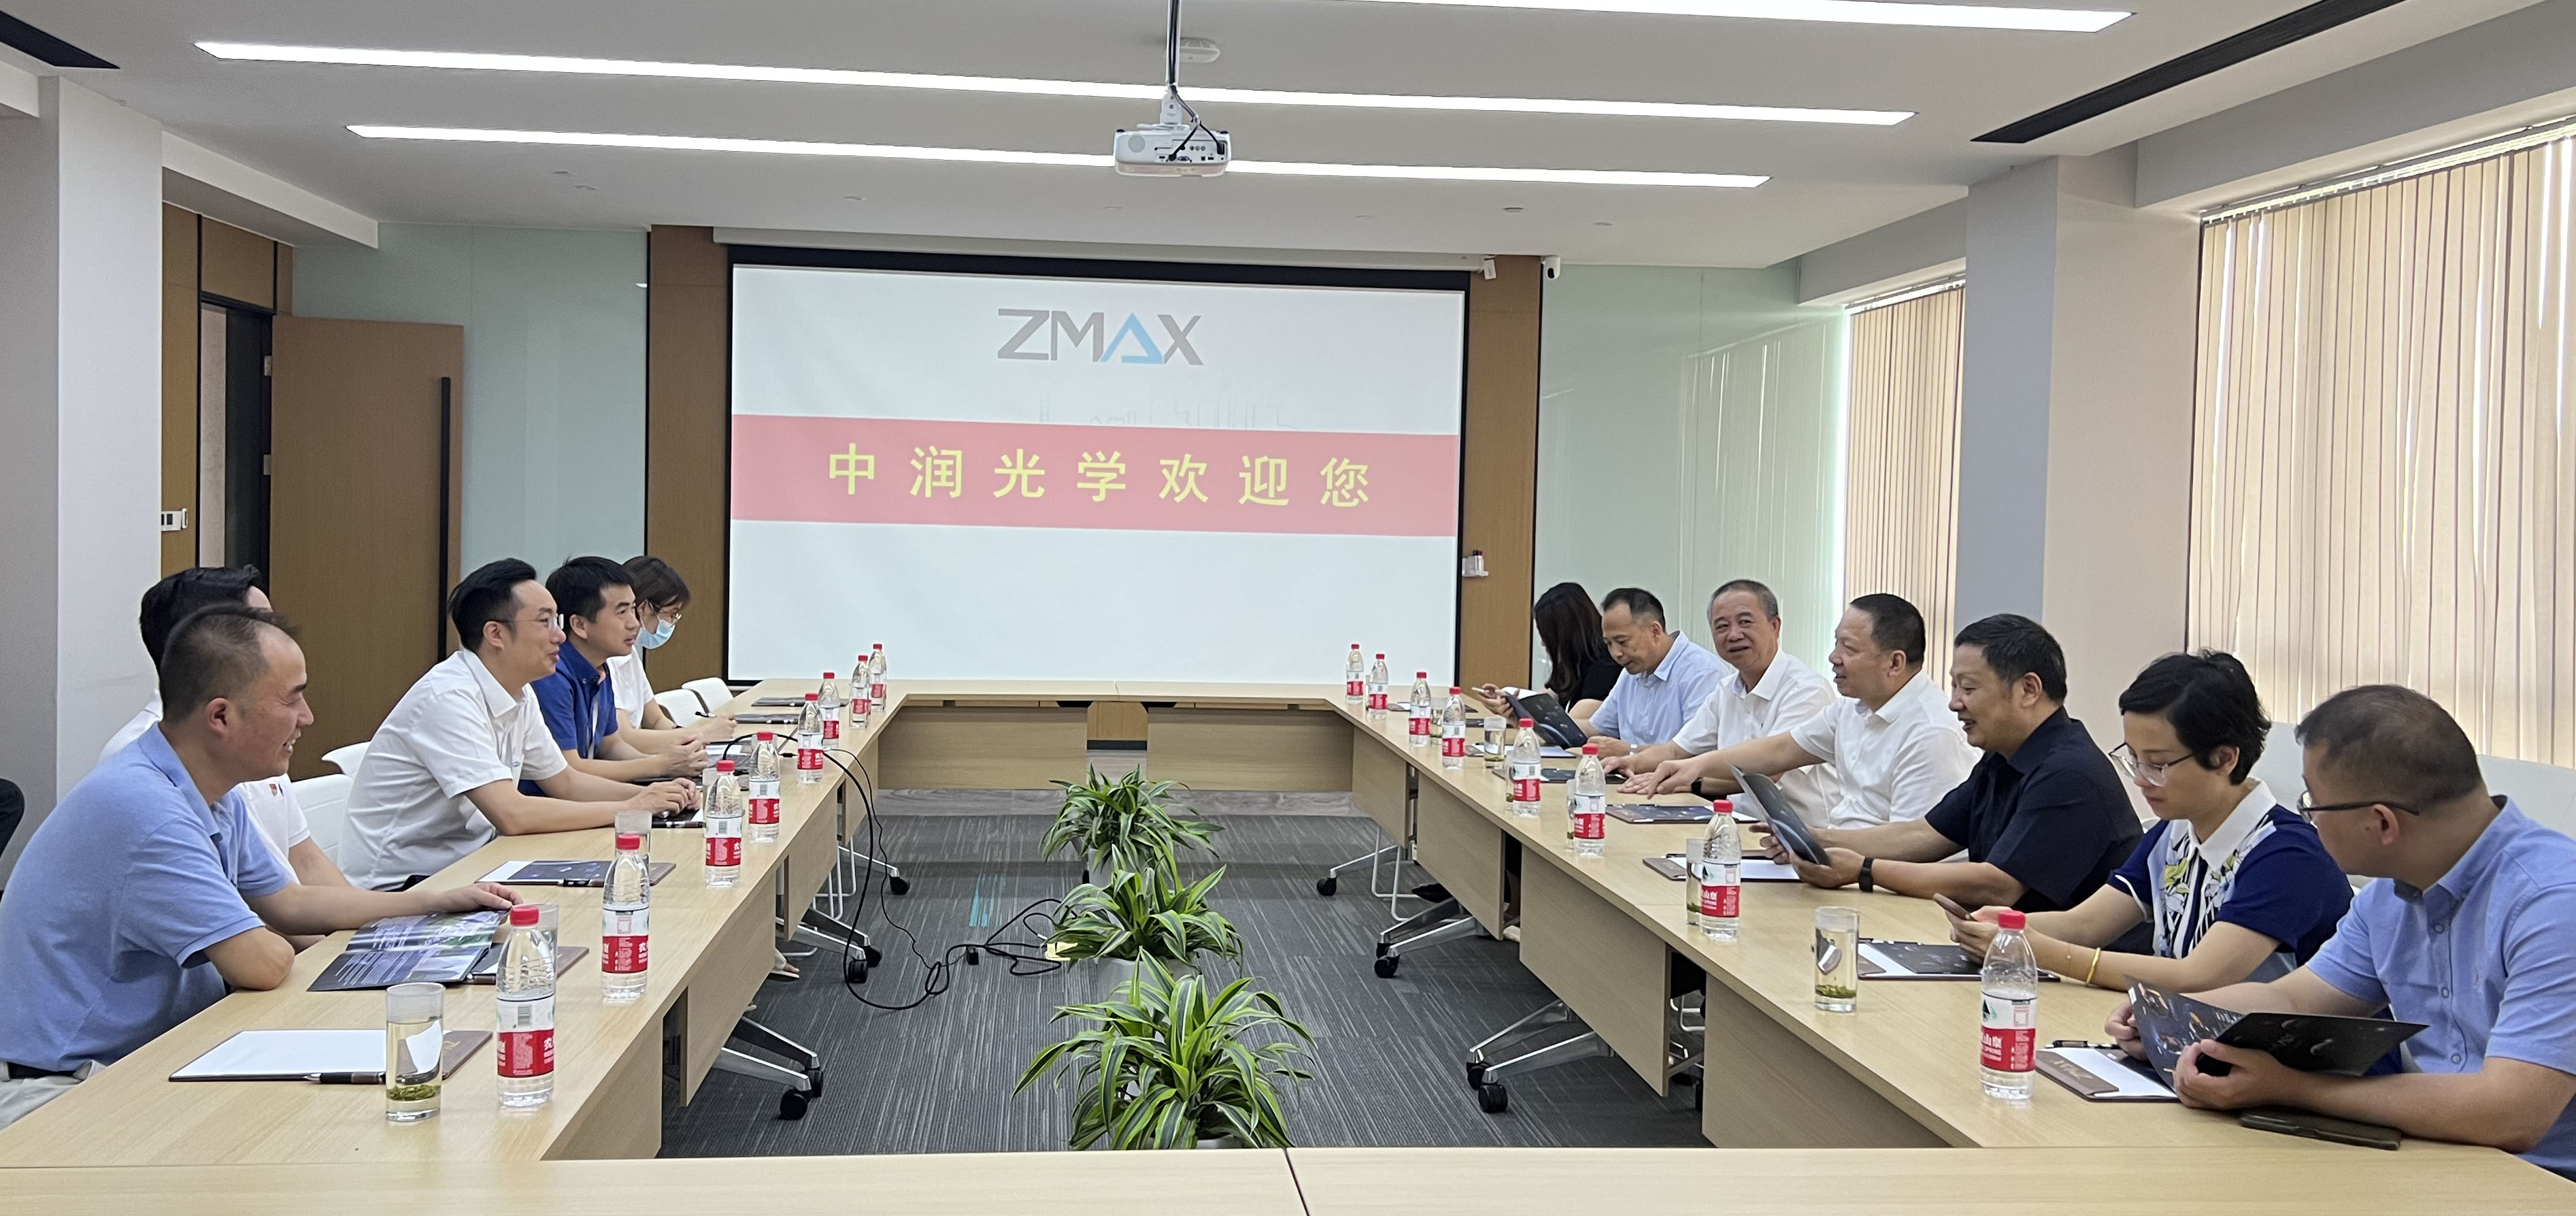 Wang Jie, member of the Standing Committee of the Zhejiang Provincial People's Congress and deputy director of the Finance and Economic Committee, and his delegation visited ZMAX Optech for investigation and research